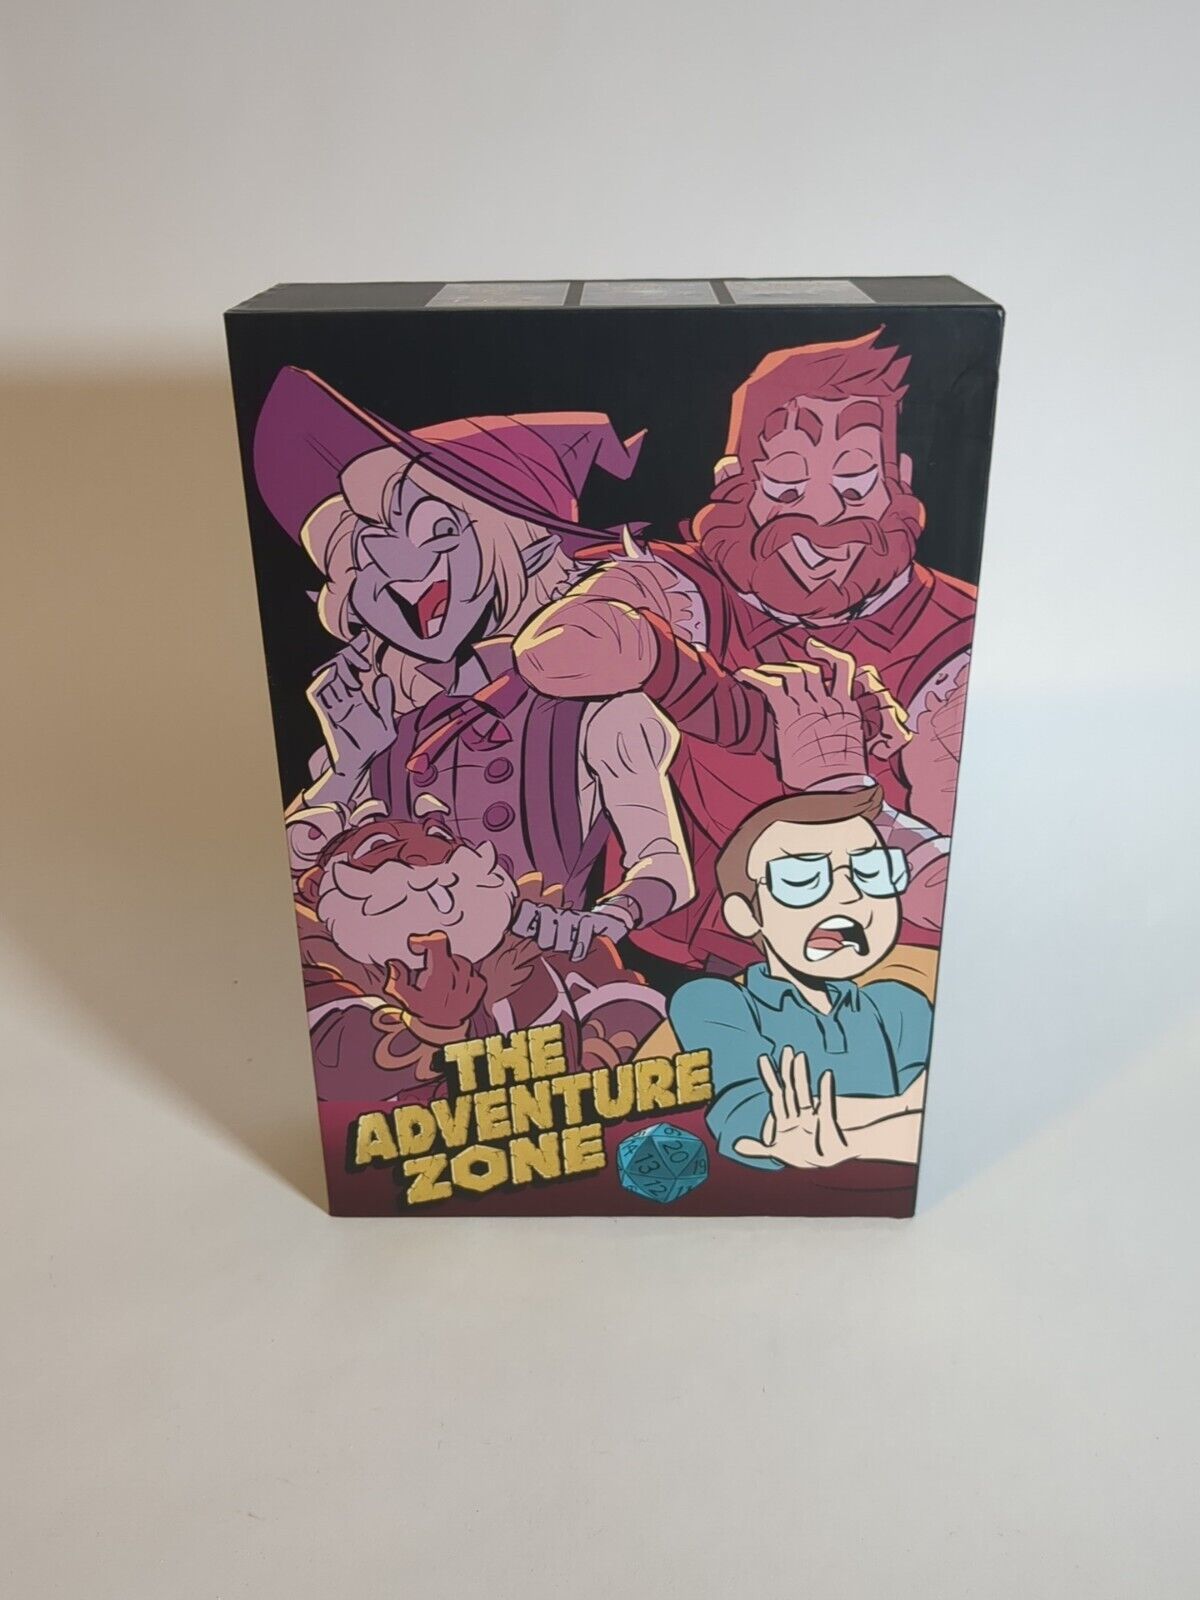 The Adventure Zone Boxed Set by McElroy & Pietsch Books 1-3 plus Poster Open Box